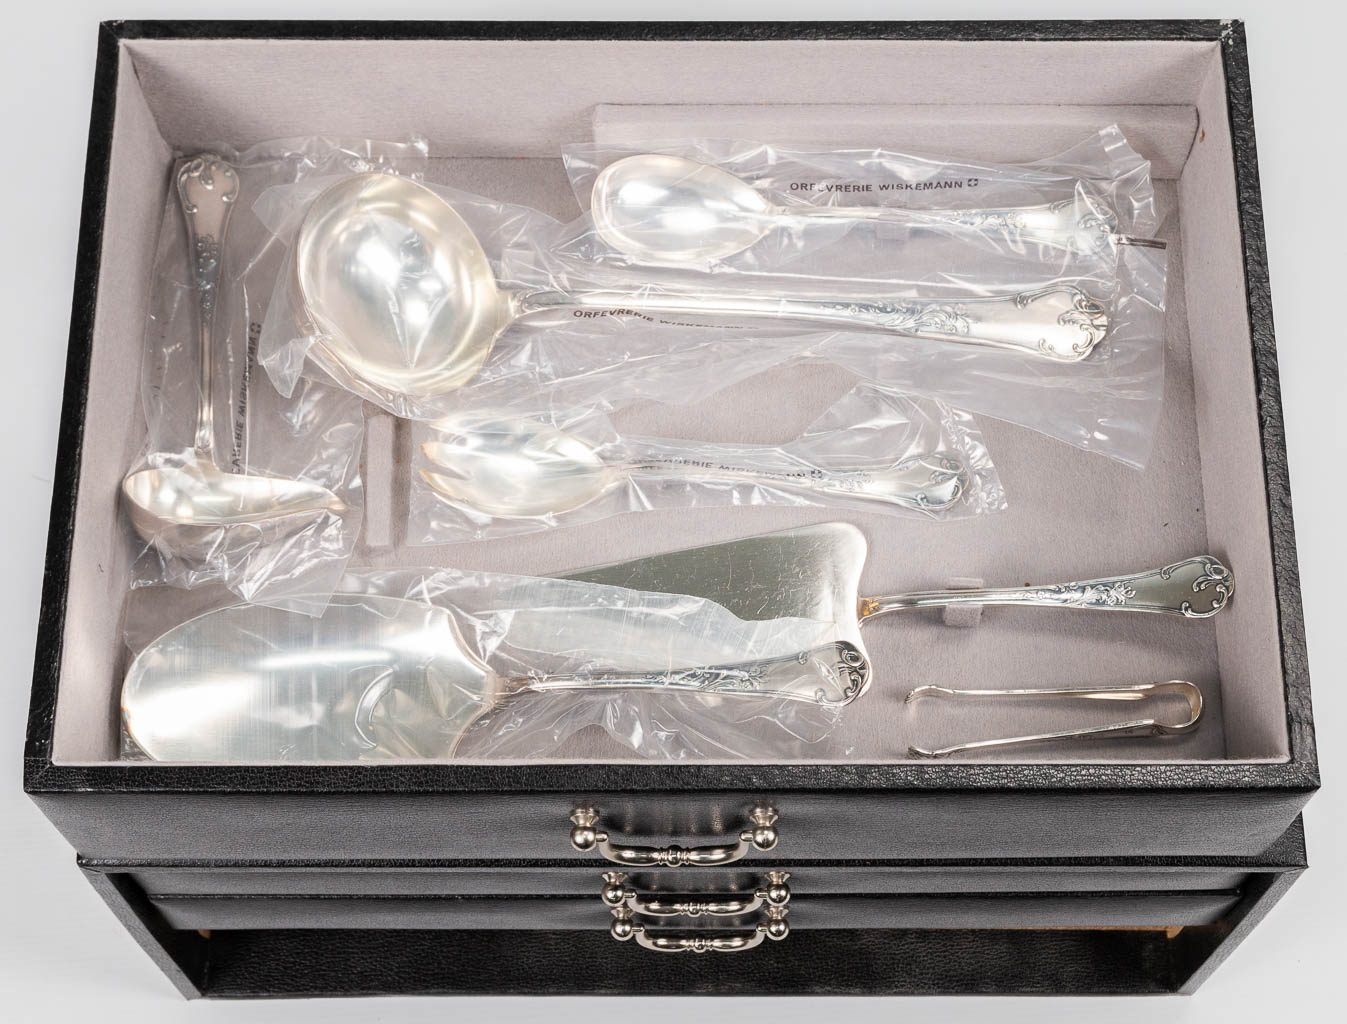 A collection of 2 silver plated cutlery sets of which 1 is marked Wiskemann, model 